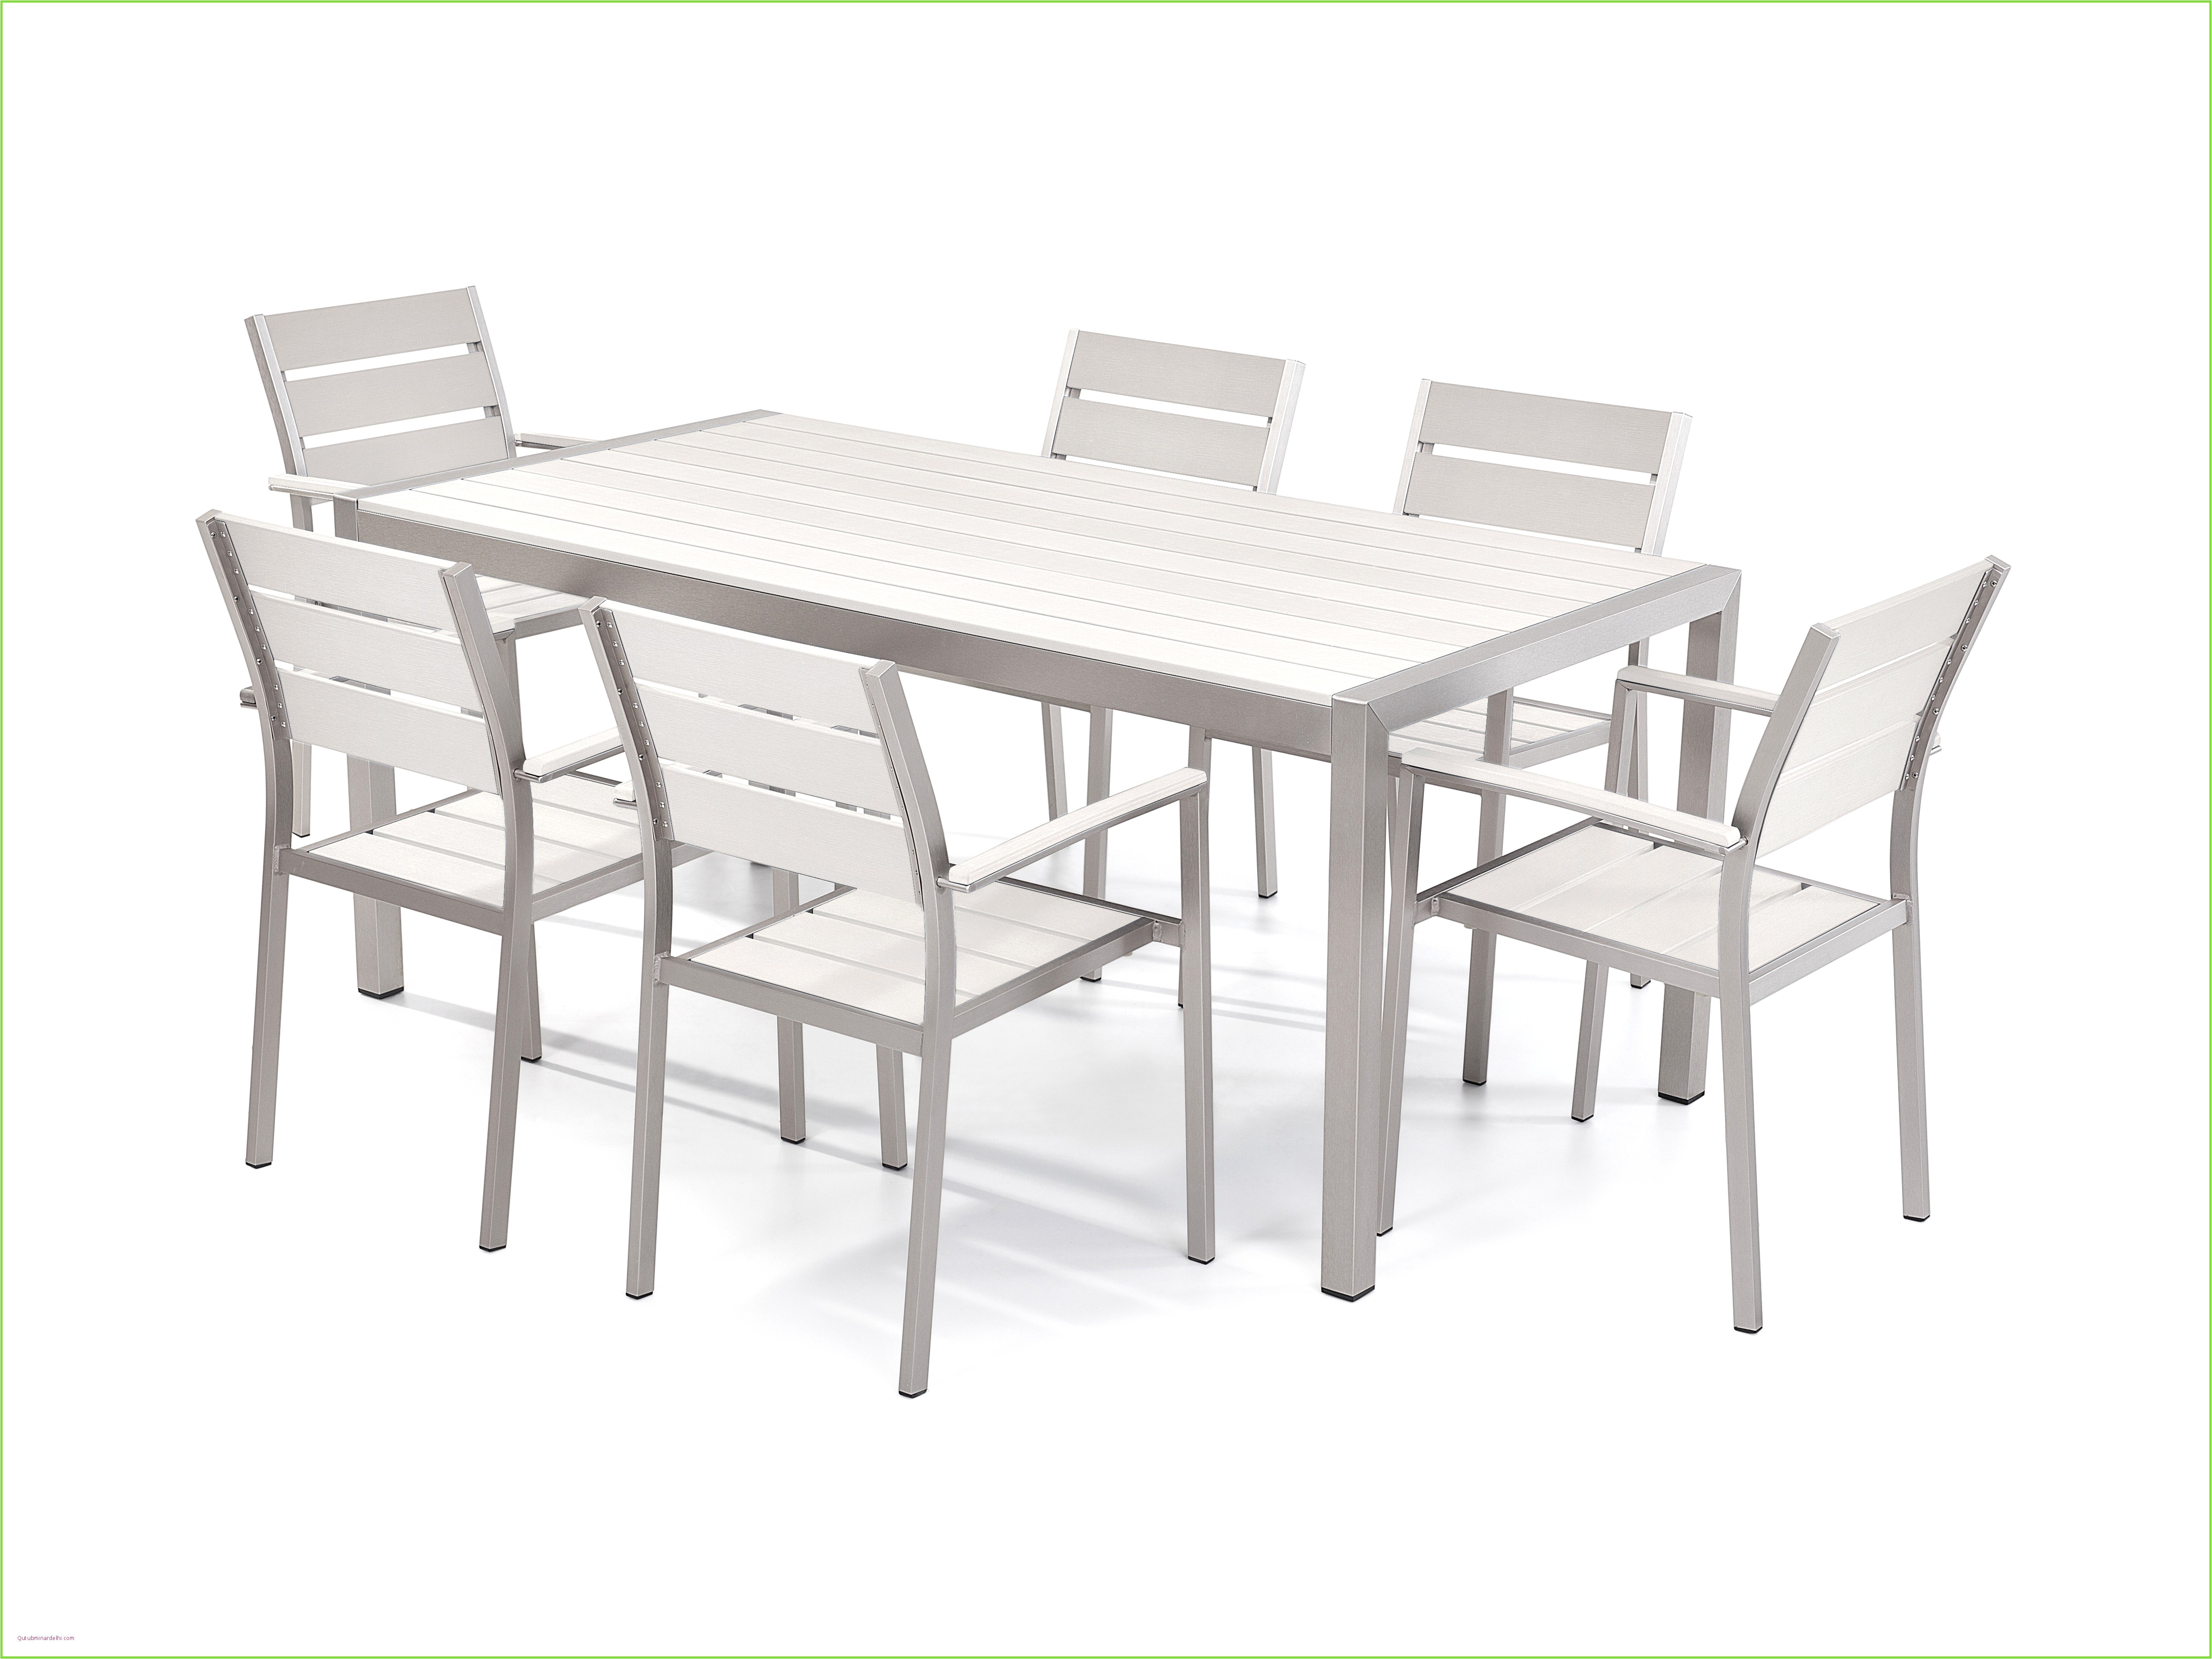 gorgeous aluminum outdoor dining table bomelconsult from dining table bench world market sourcebeautiful dining table bench world market scheme